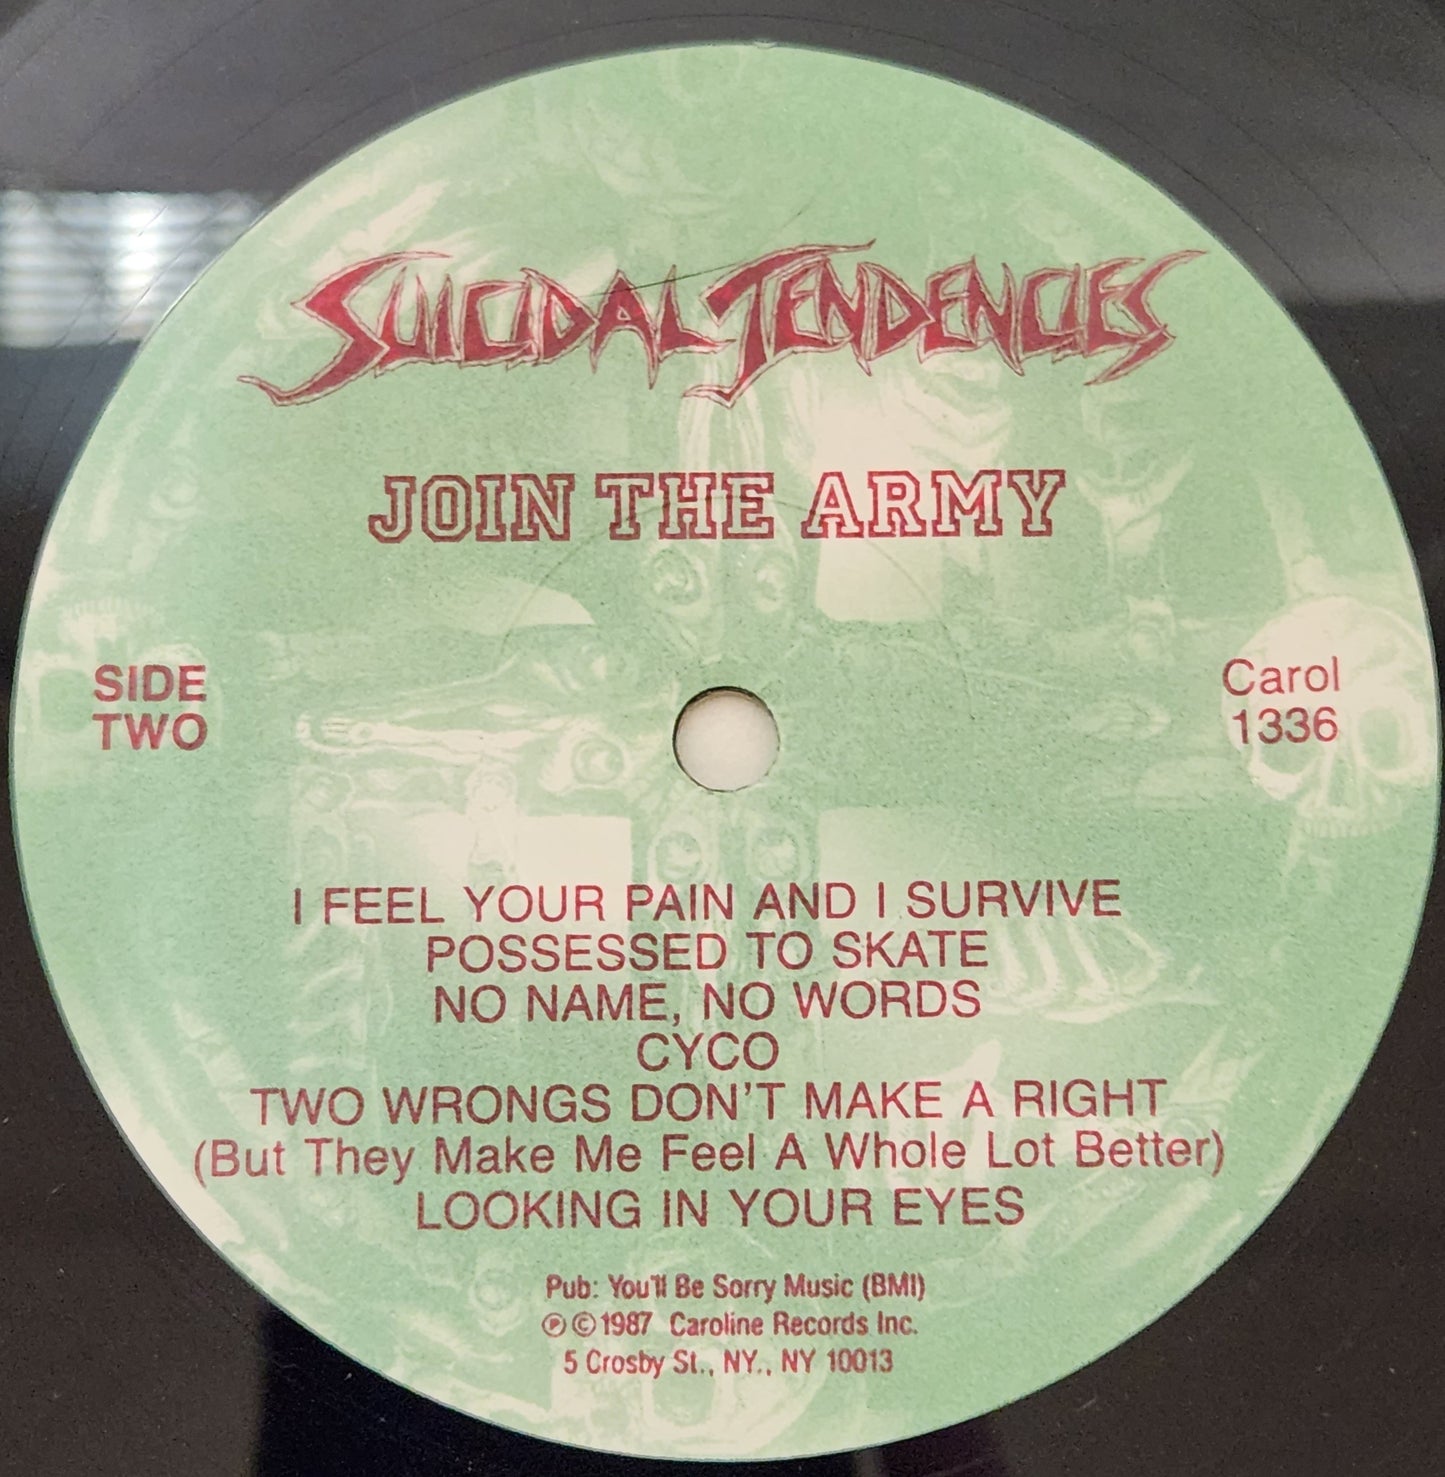 Suicidal Tendencies "Join The Army" 1987 Hardcore Punk Record Album